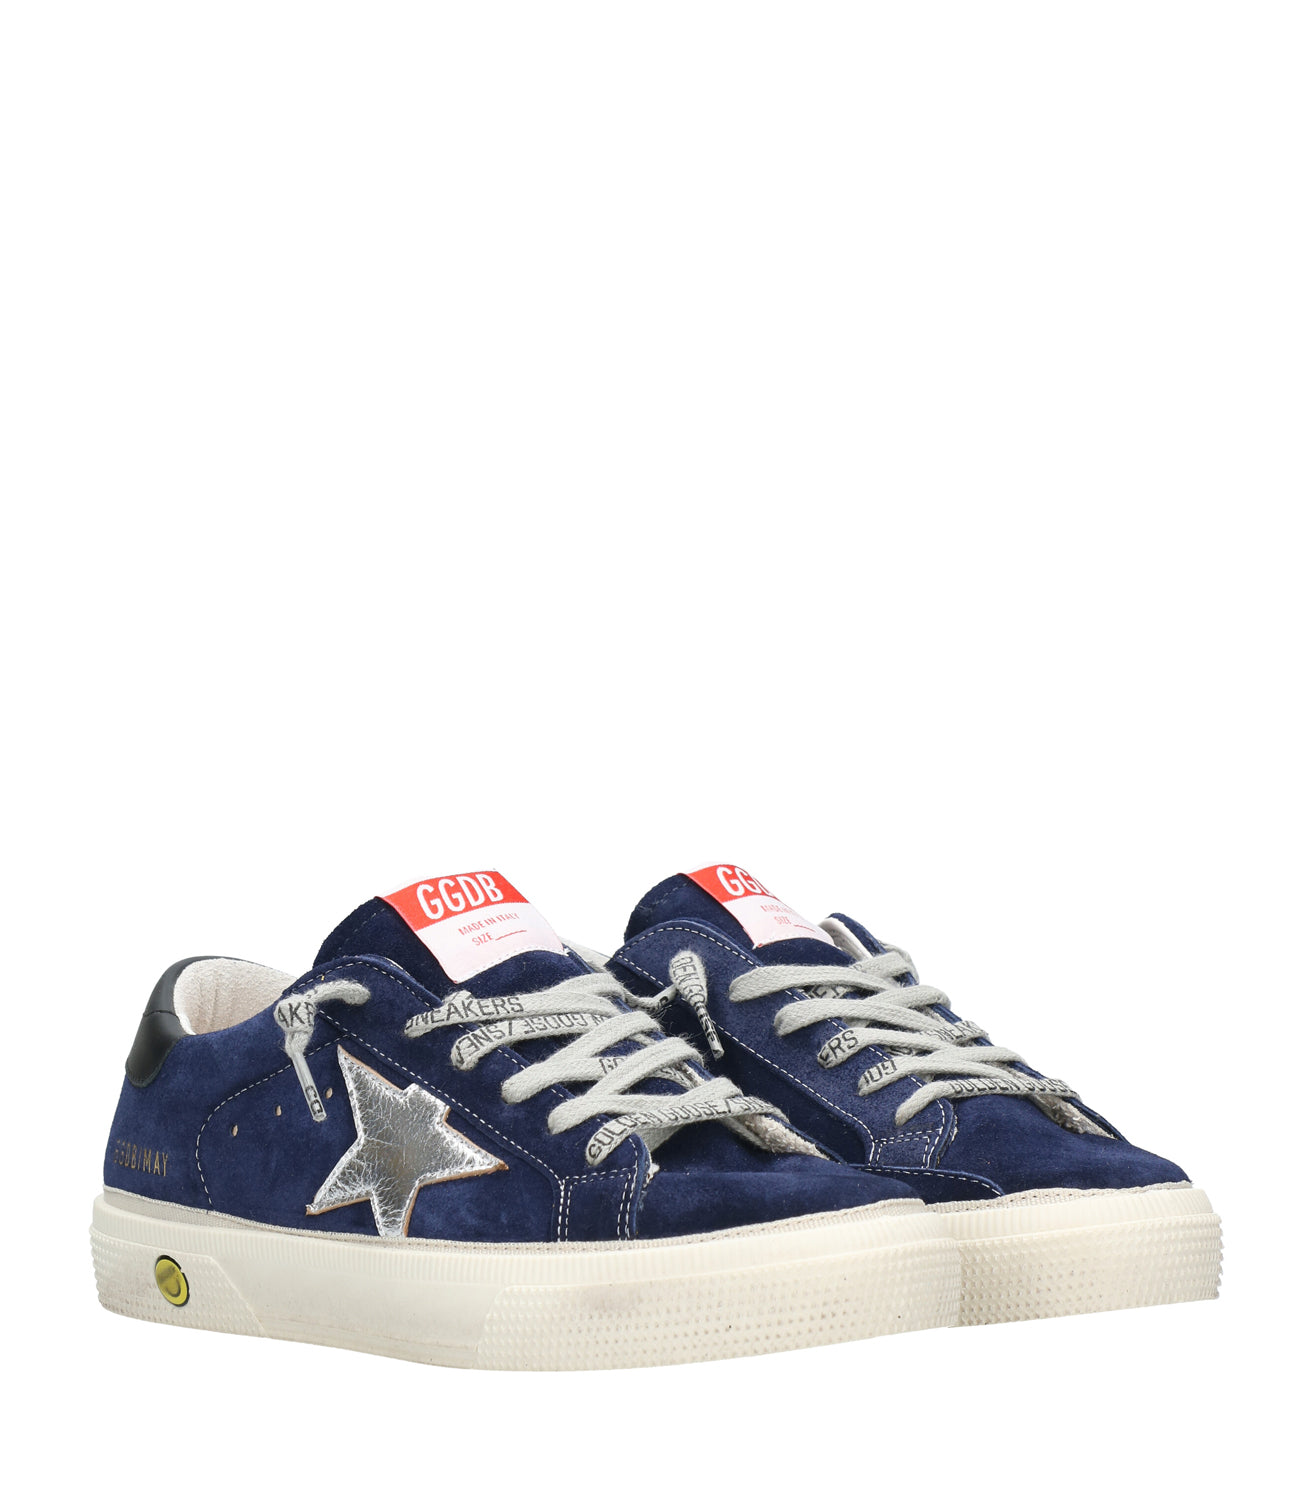 Golden Goose Deluxe Brand | Sneakers May Dark Blue, Silver and Black